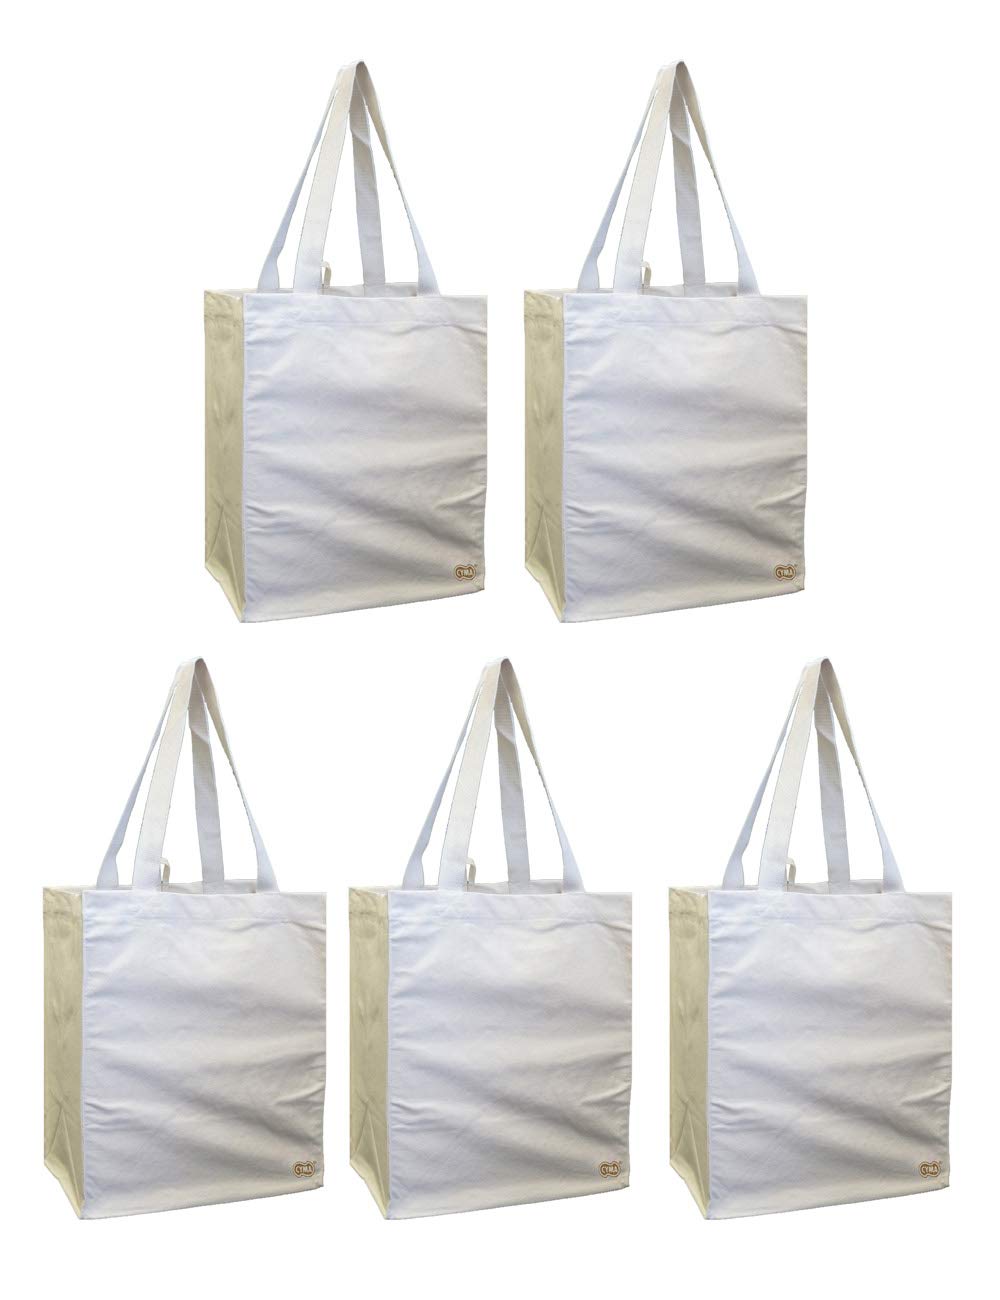 100% Cotton Canvas Oversized Grocery/Multipurpose Tote Bag 5 Pack, Shoulder Length With Extra Strong Cotton Webbing Handles